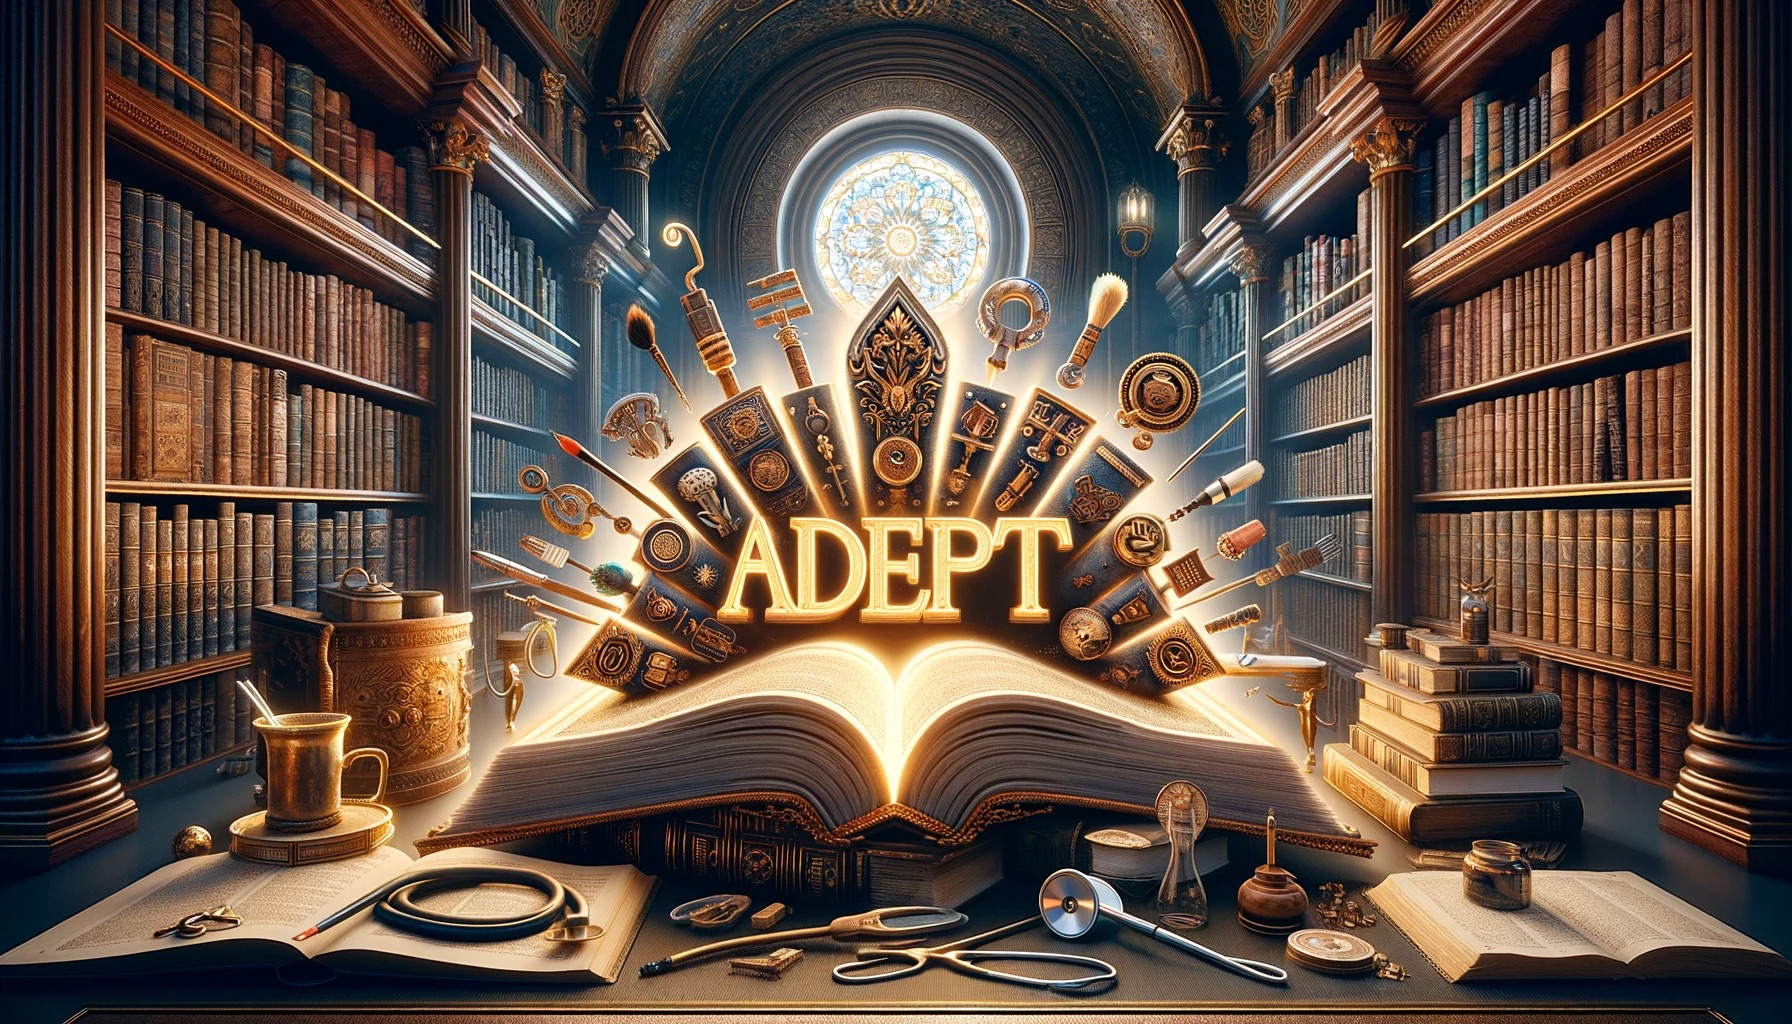 Adept – More Than Just a Word